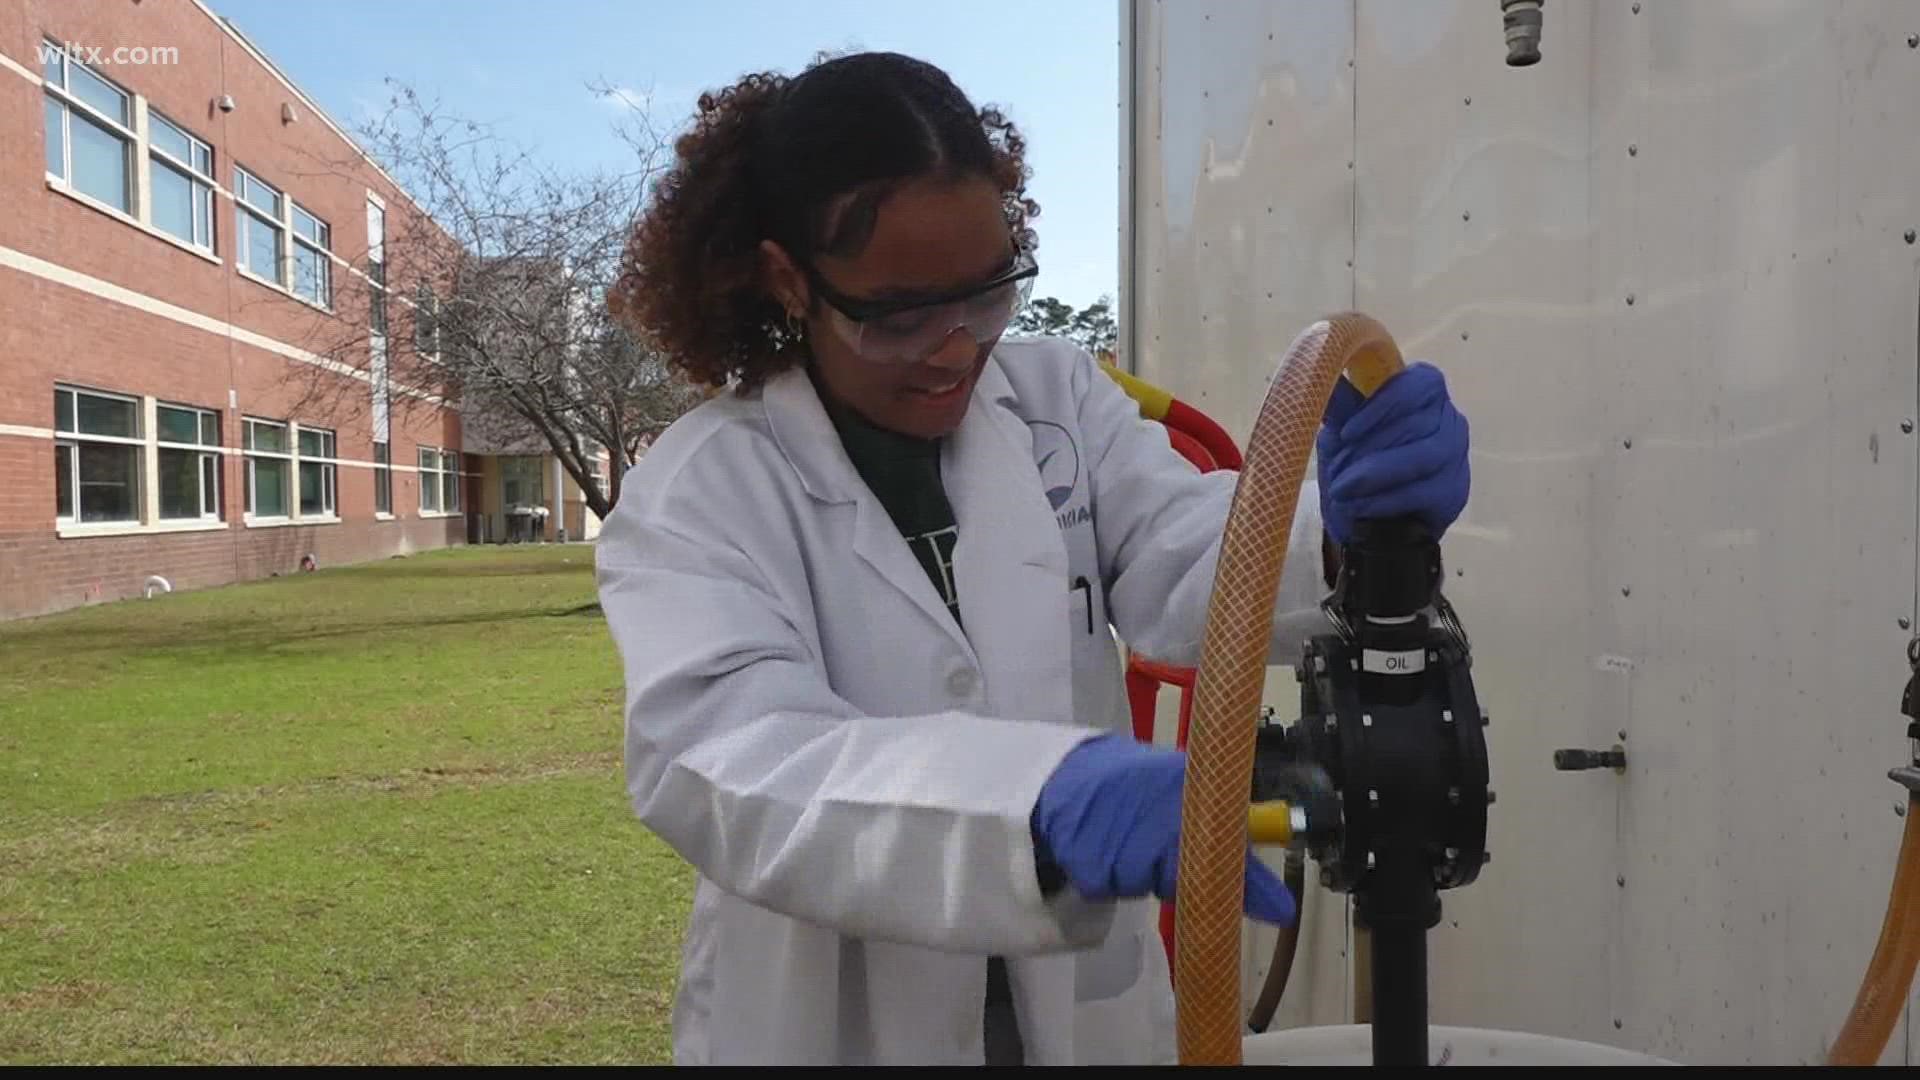 Blythewood High School students want your cooking oil to produce diesel fuel. Here's how the oil goes from frying chicken to fueling your car.